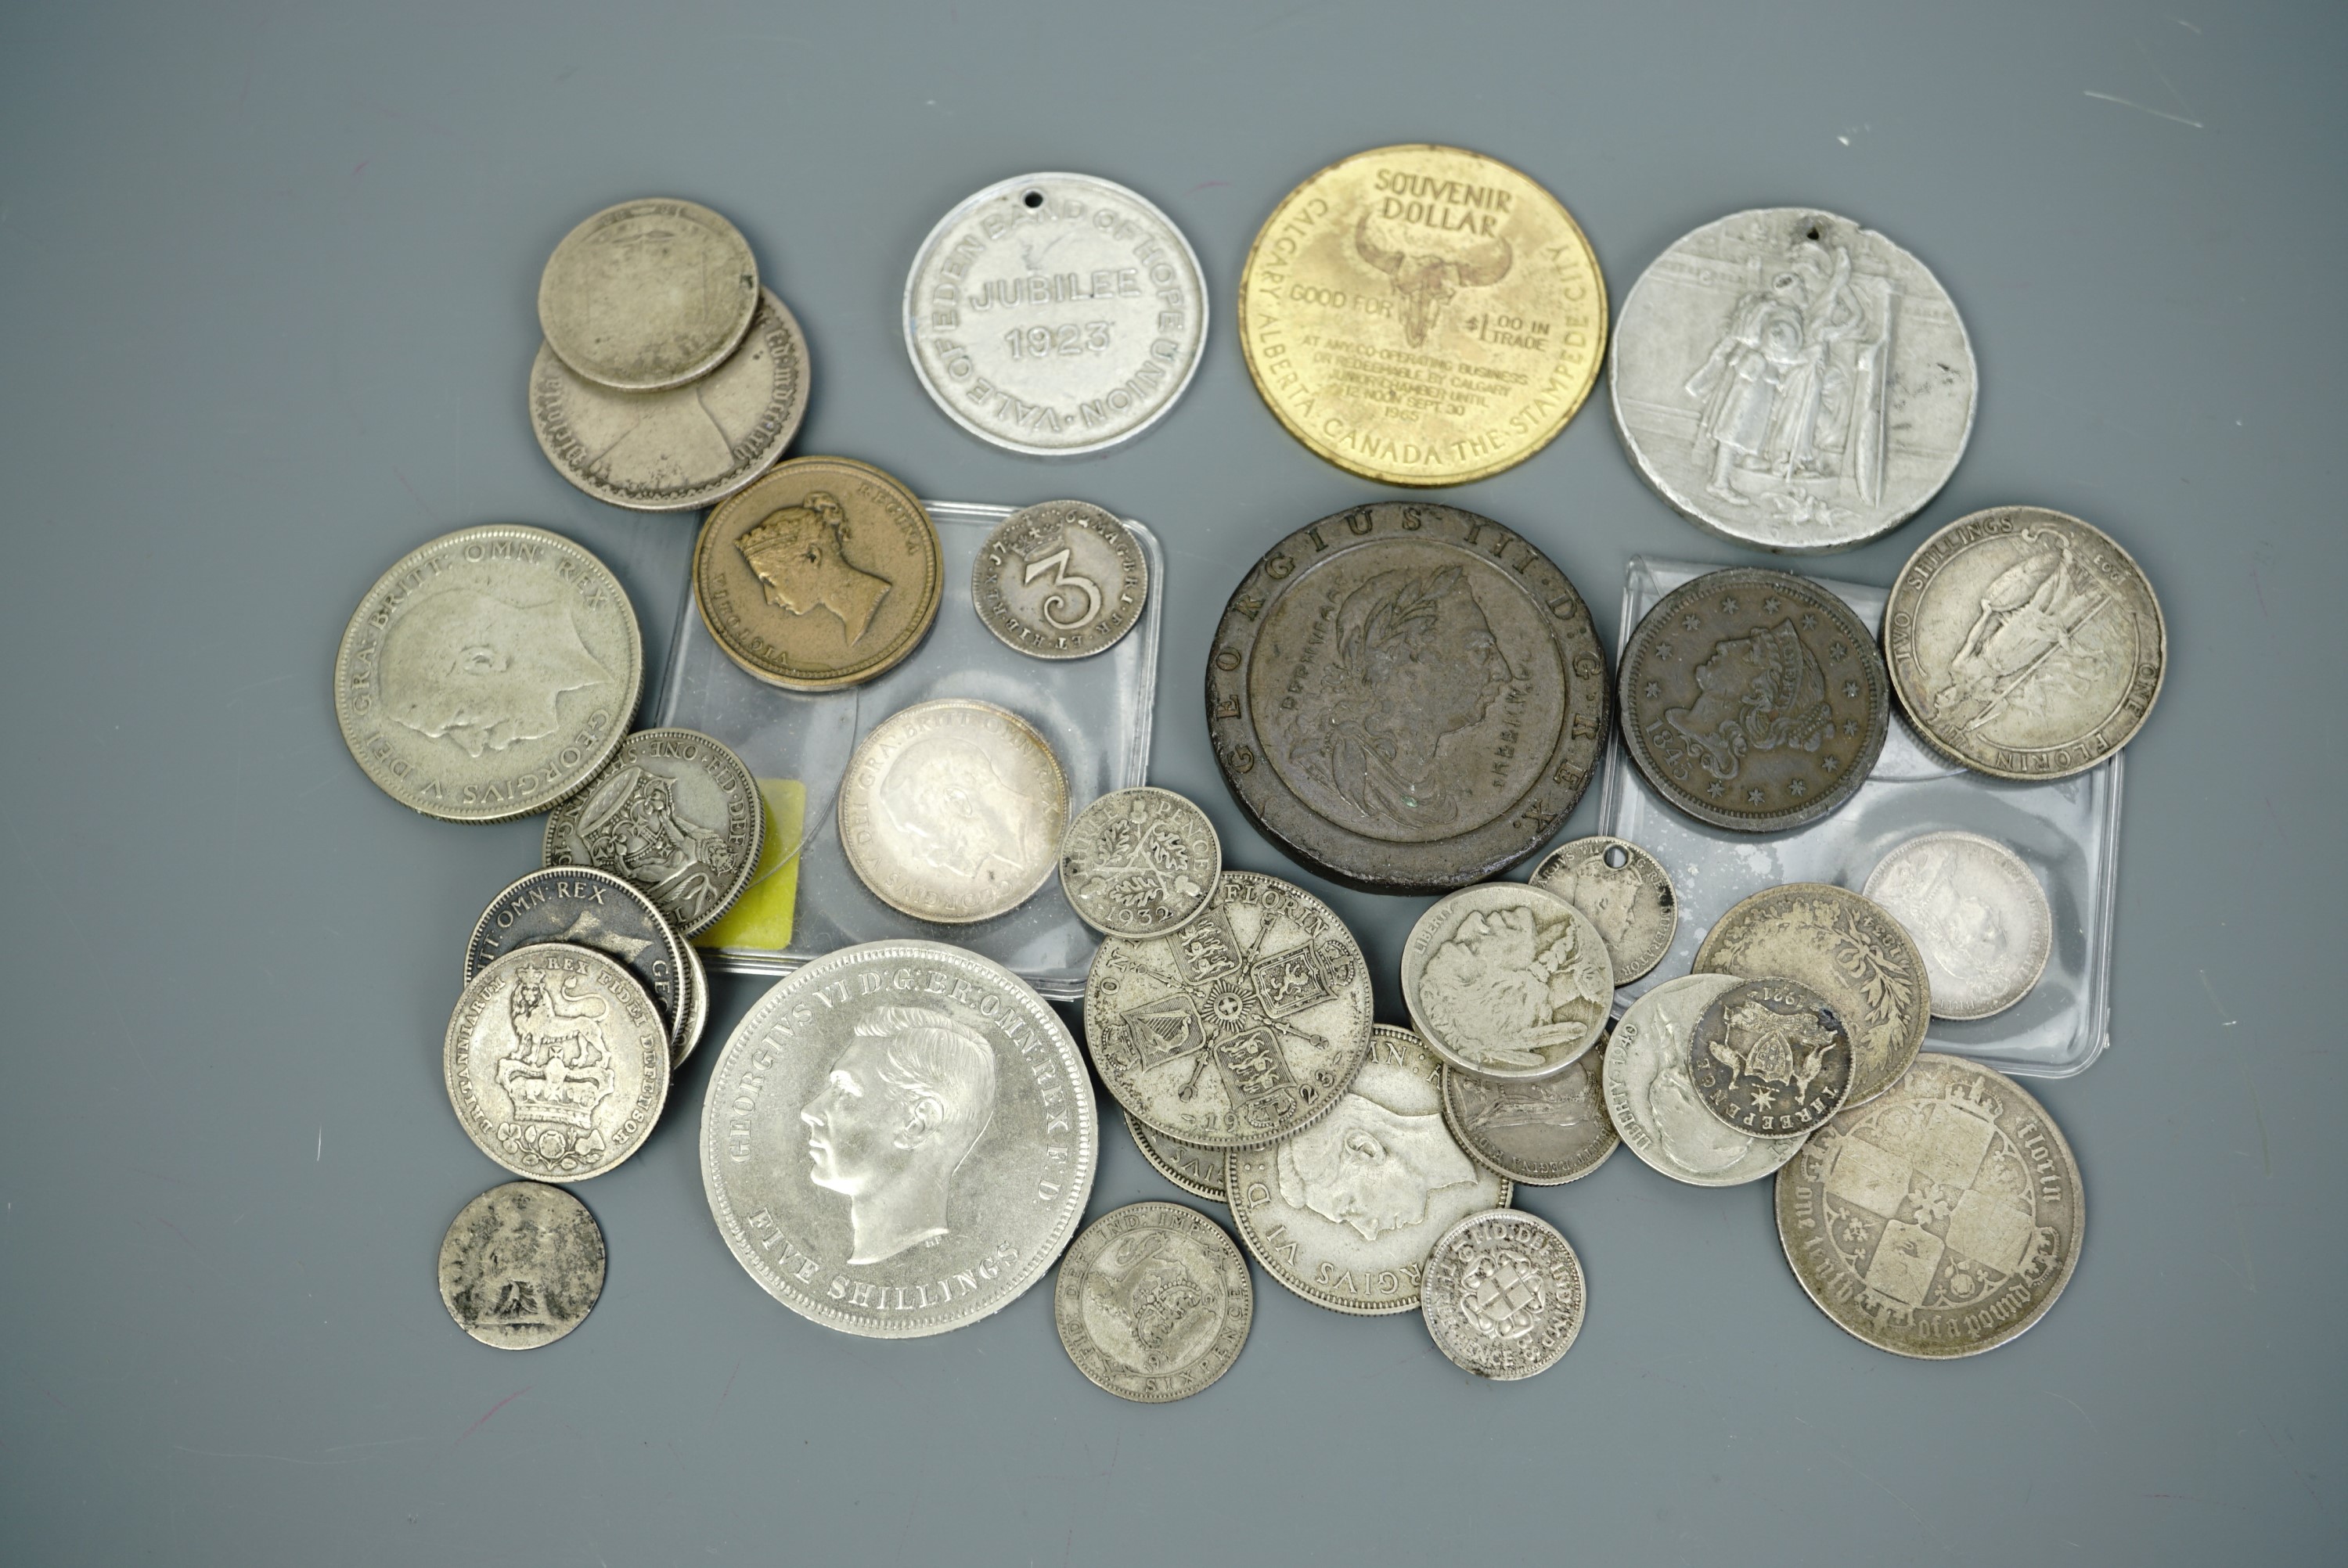 Sundry largely GB coins, tokens and medallions including an over-struck "cartwheel" 1d, Georgian and